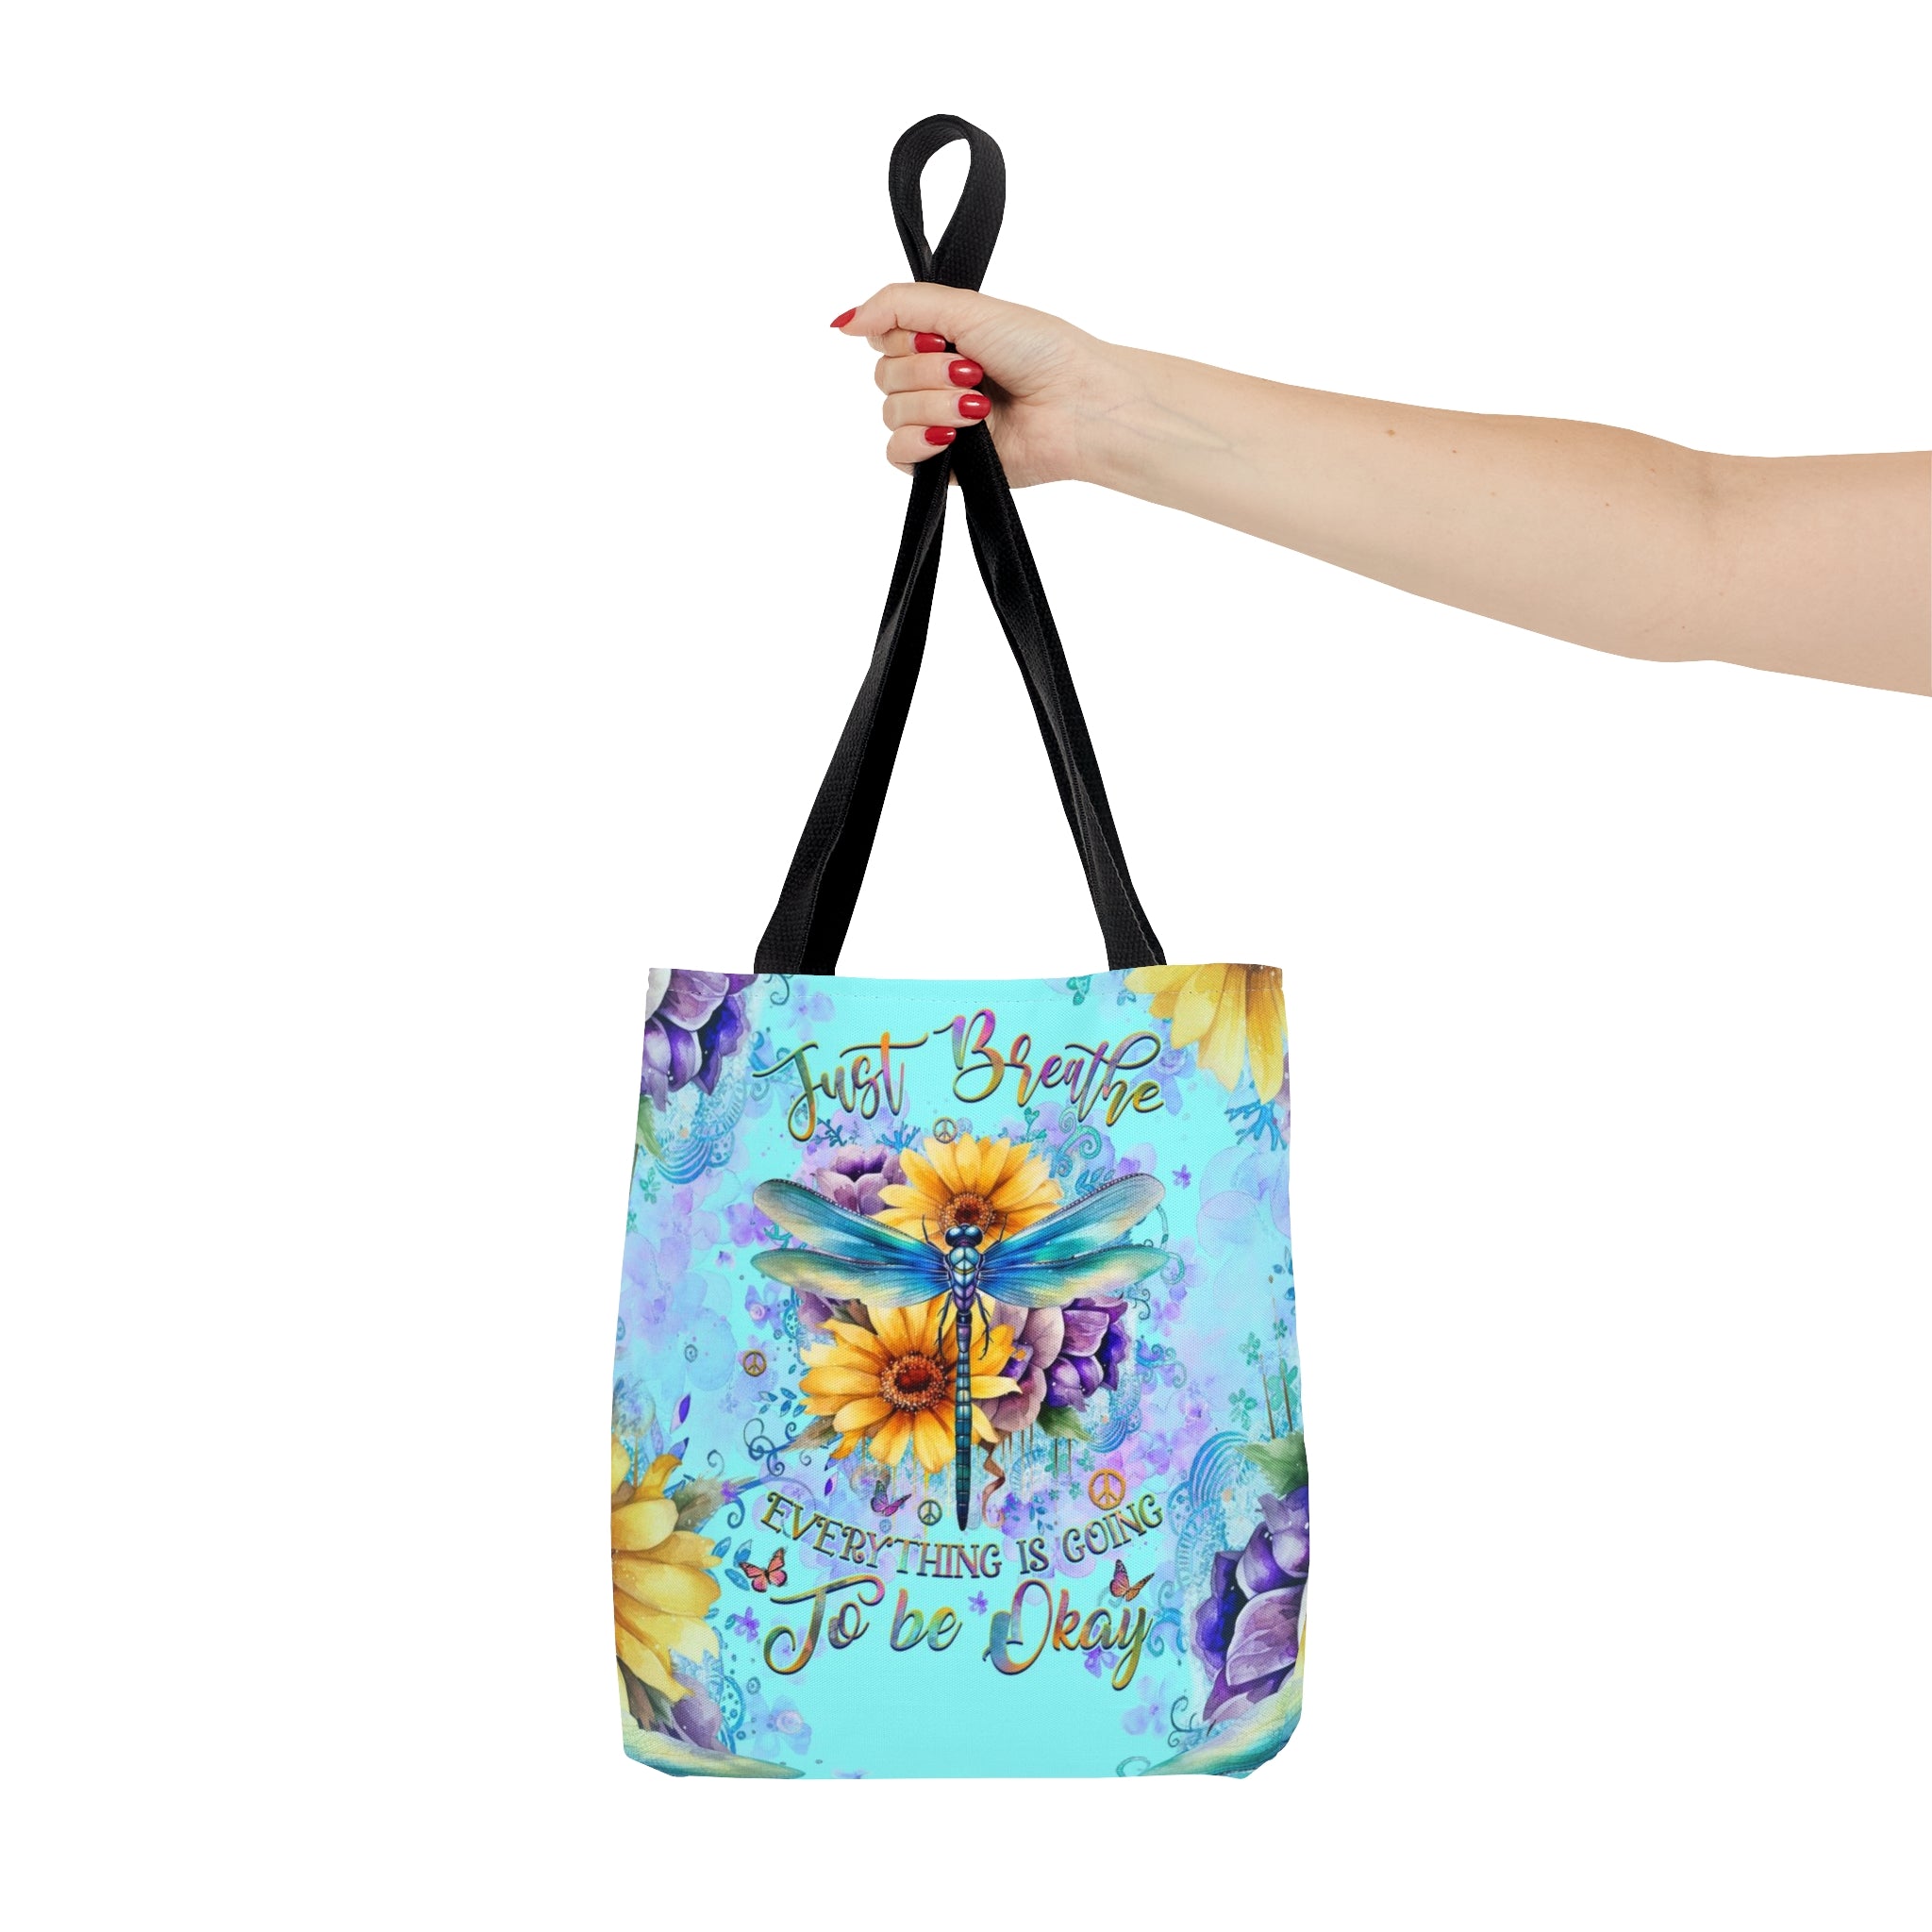 JUST BREATHE DRAGONFLY TOTE BAG - YH0210233